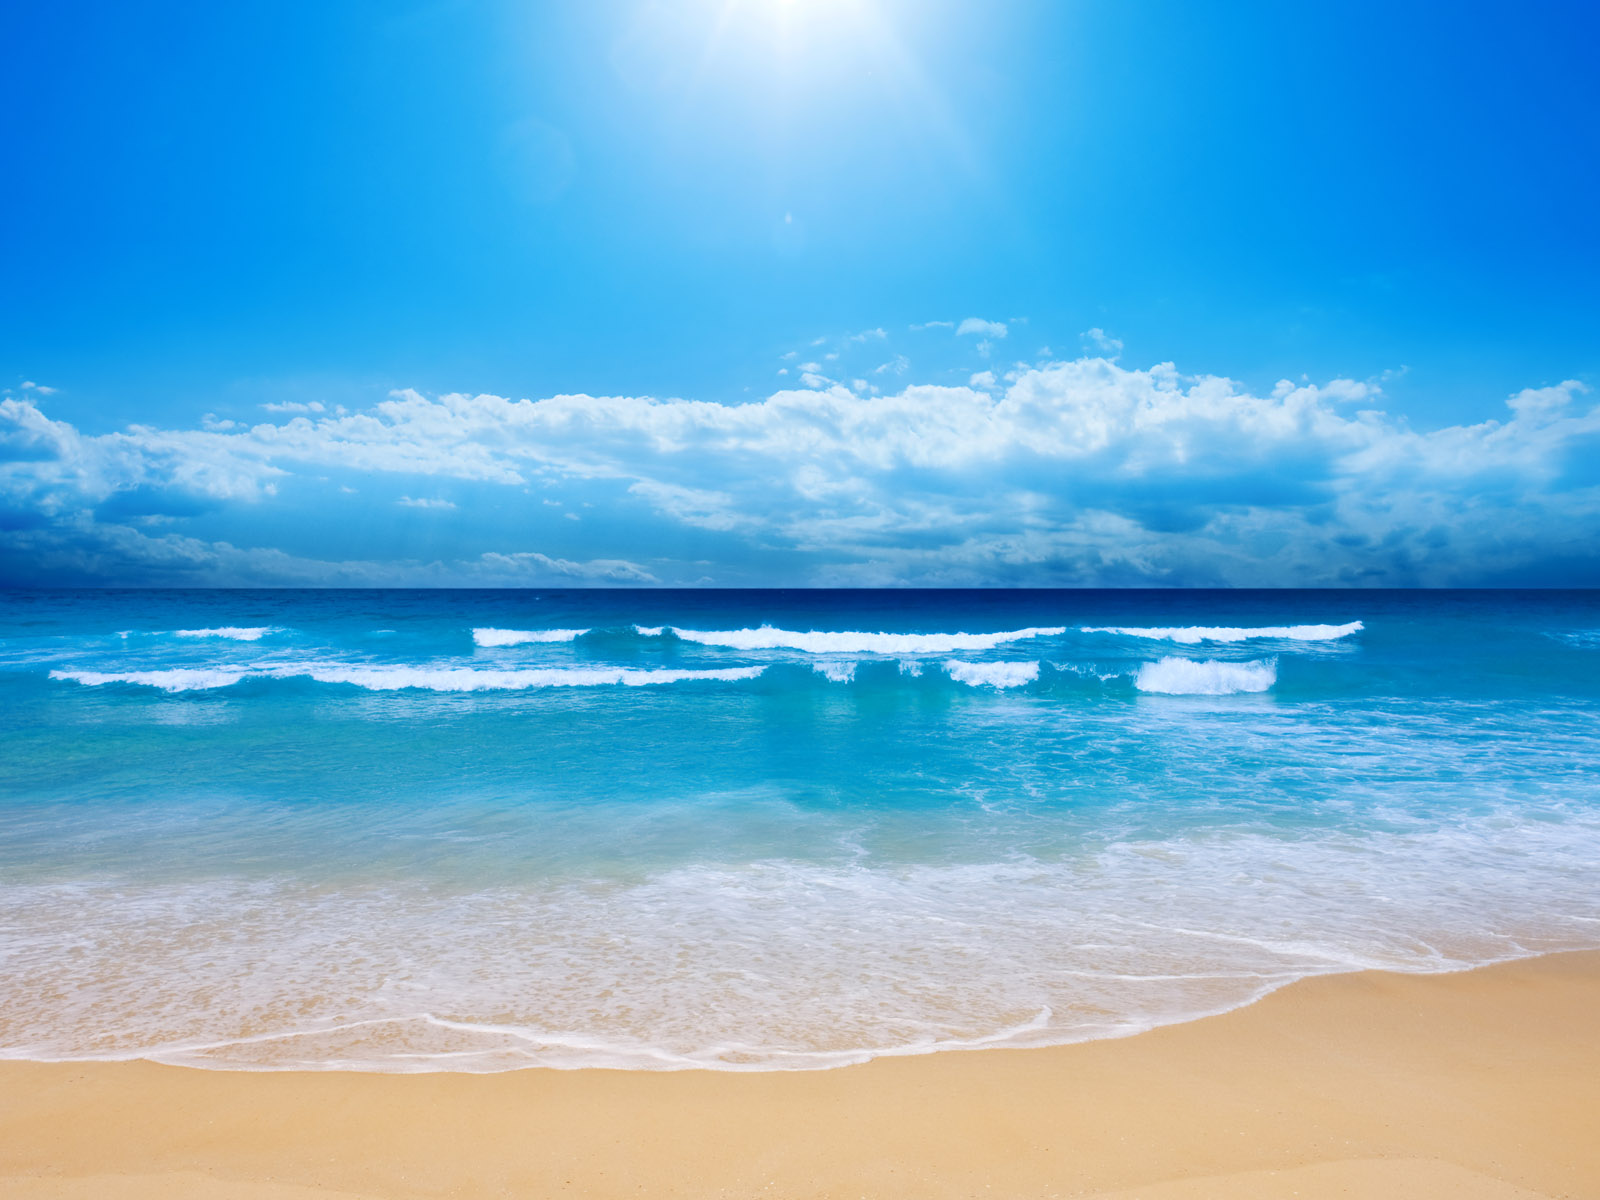 A Place For HD Wallpapers Desktop Wallpapers Beach 1600x1200